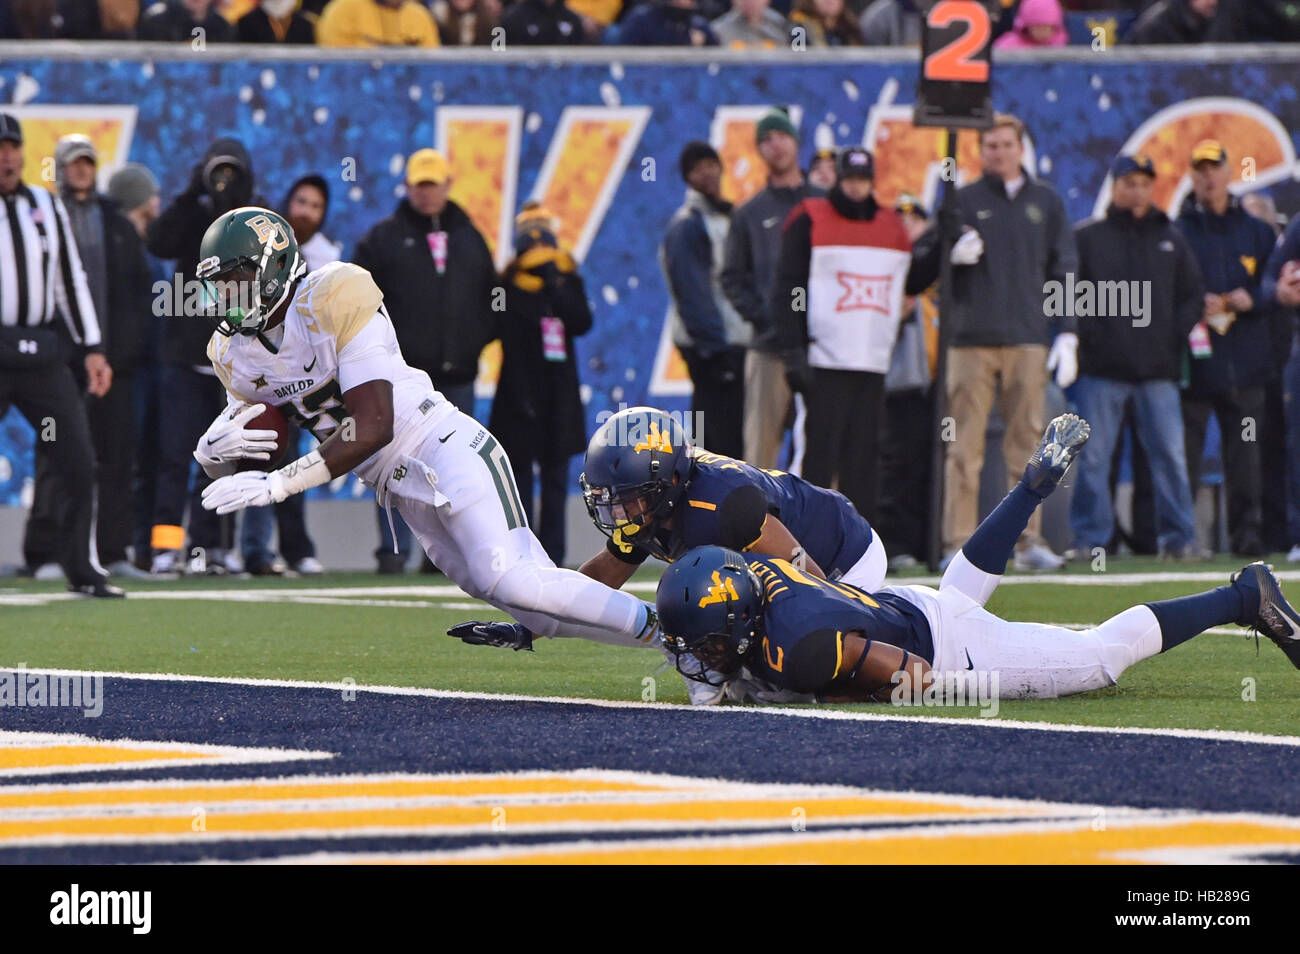 Morgantown, West Virginia, USA. 3rd Dec, 2016. Baylor Bears running back TERENCE WILLIAMS (22) falls into the end zone for a score as he is tackled by West Virginia Mountaineers cornerback ANTONIO CRAWFORD #1 and safety JEREMY TYLER #2 and during a game played at Mountaineer Field in Morgantown, WV. WVU beat Baylor 24-21. © Ken Inness/ZUMA Wire/Alamy Live News Stock Photo